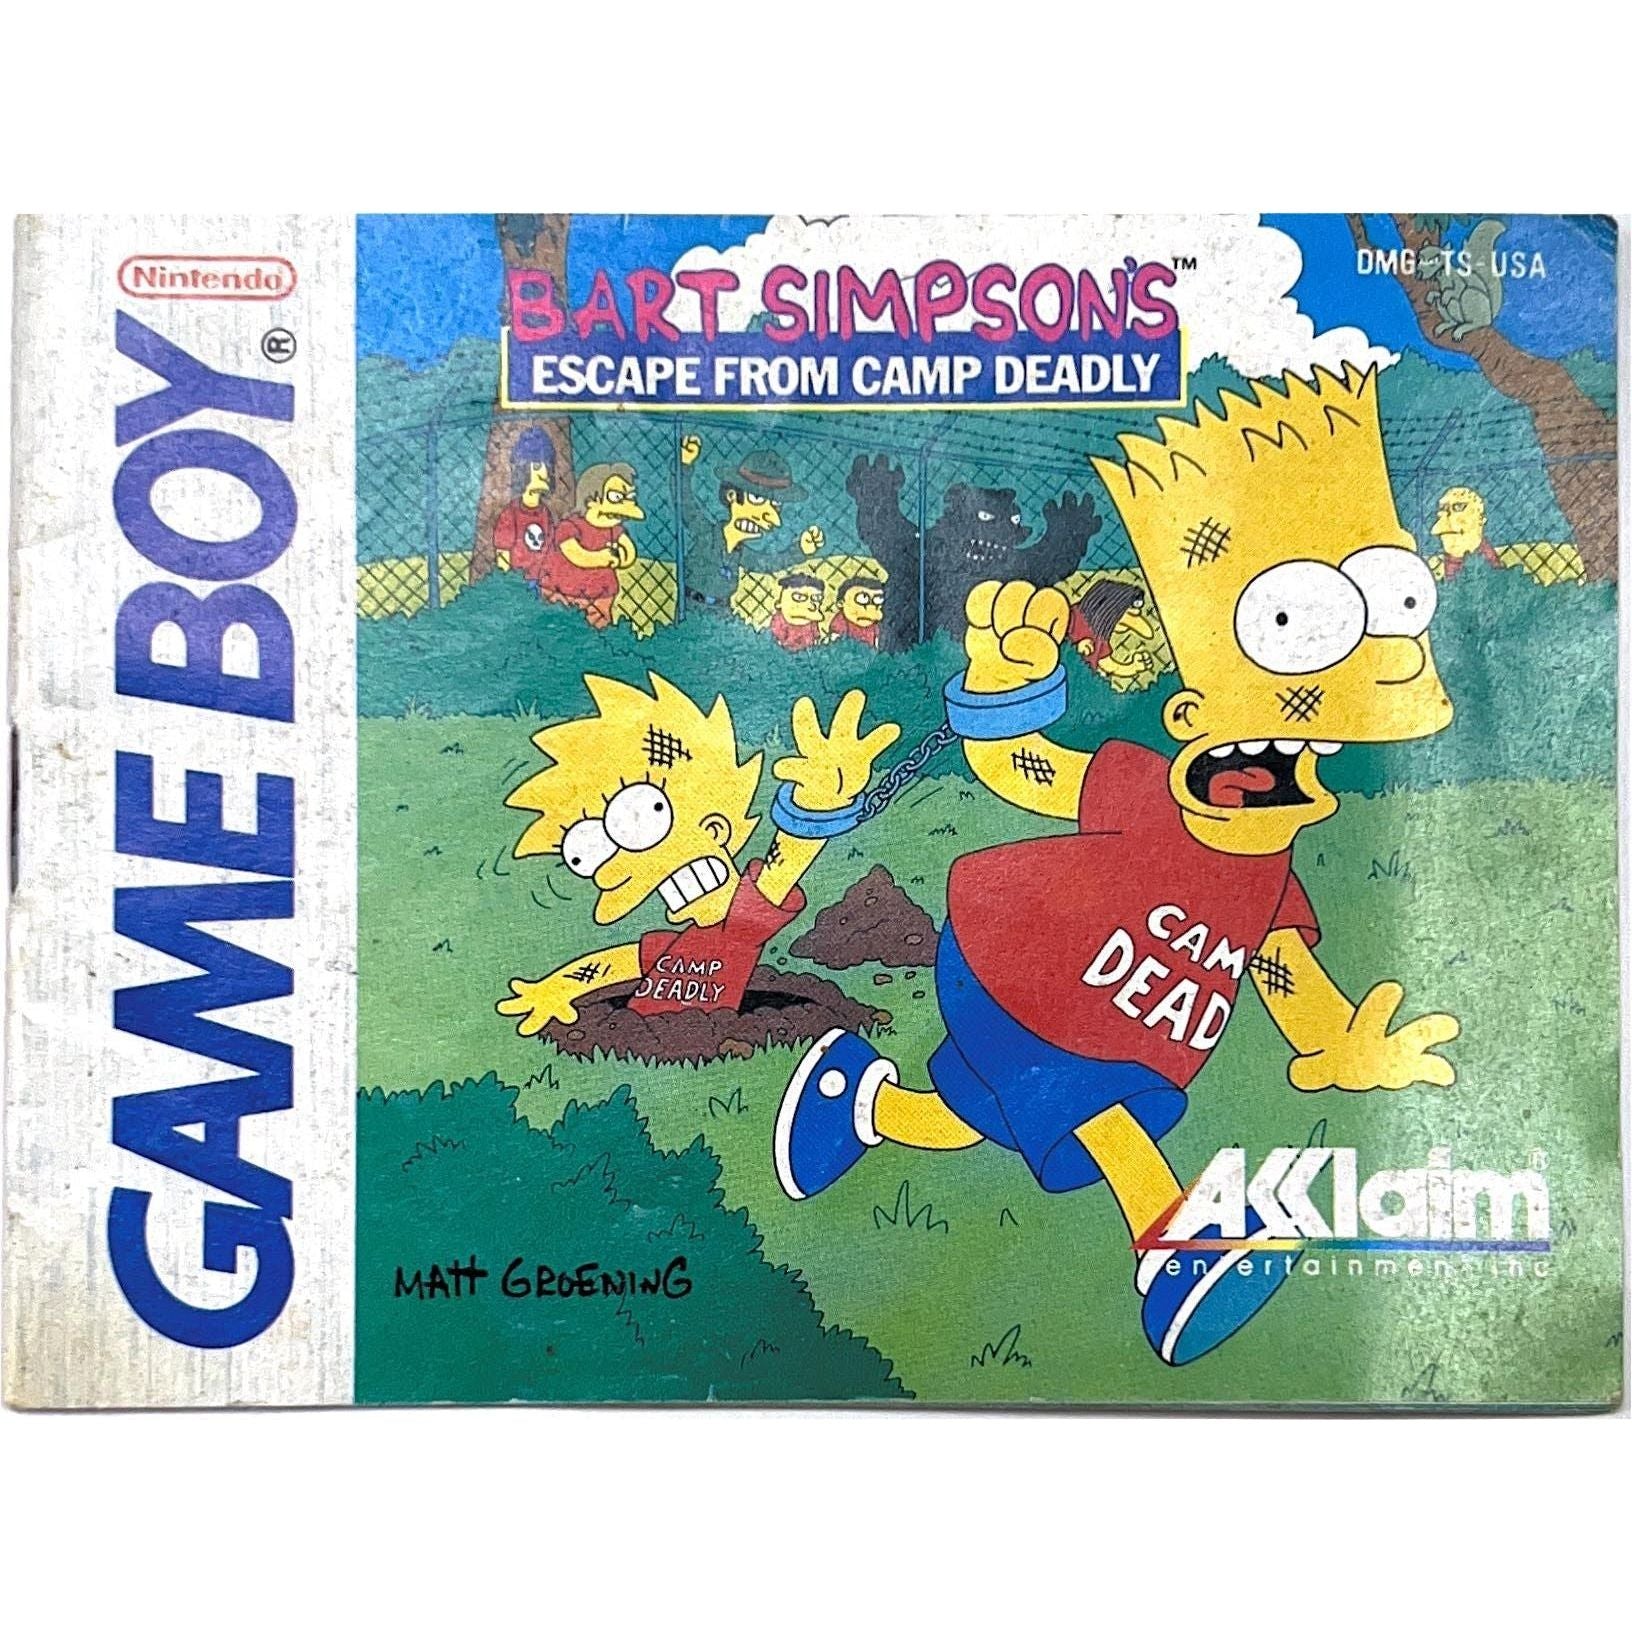 GB - Bart Simpsons Escape from Camp Deadly (Manuel)